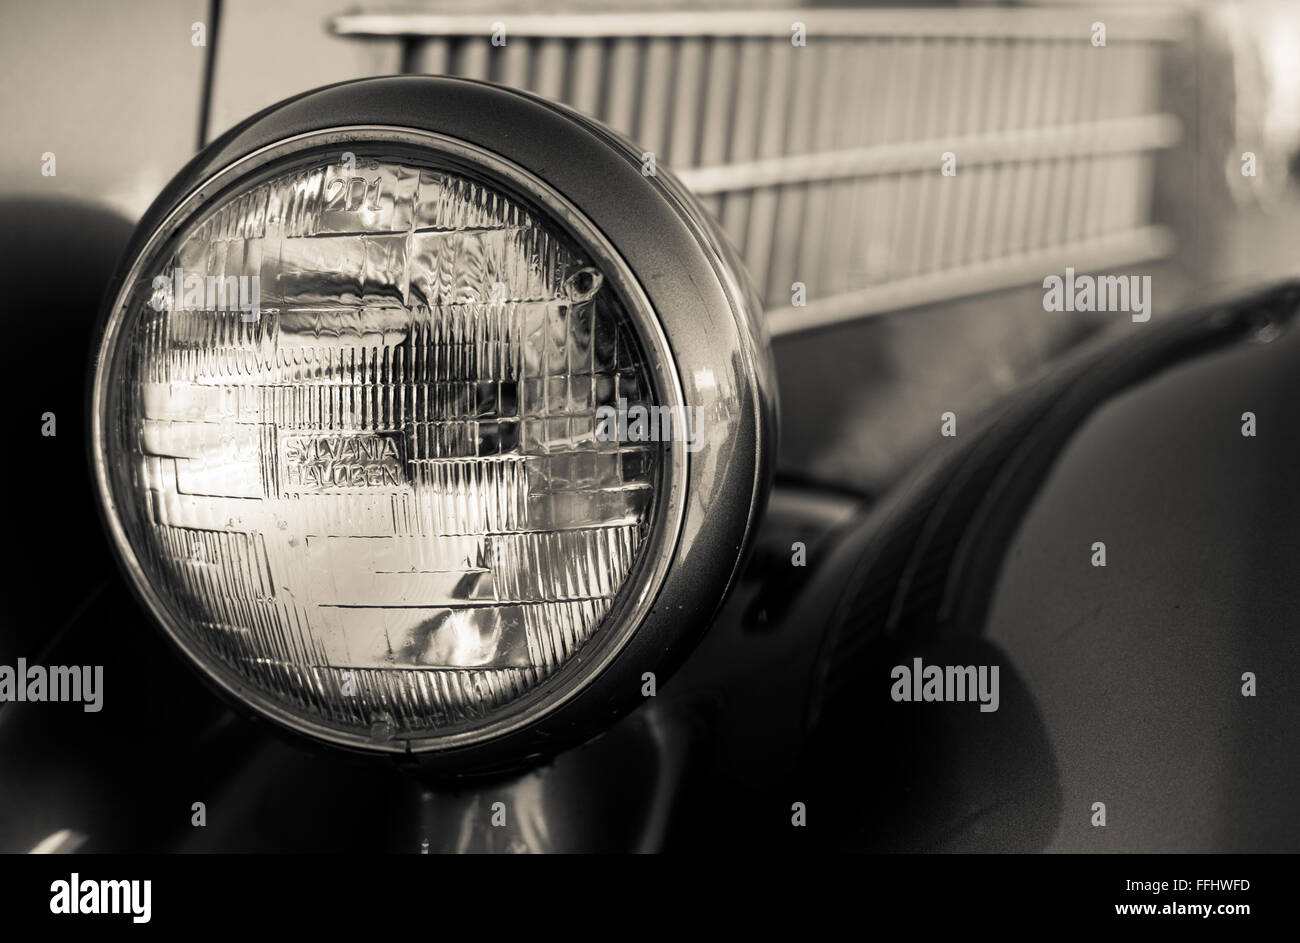 Detailed images of restored classic and vintage automobiles. Stock Photo